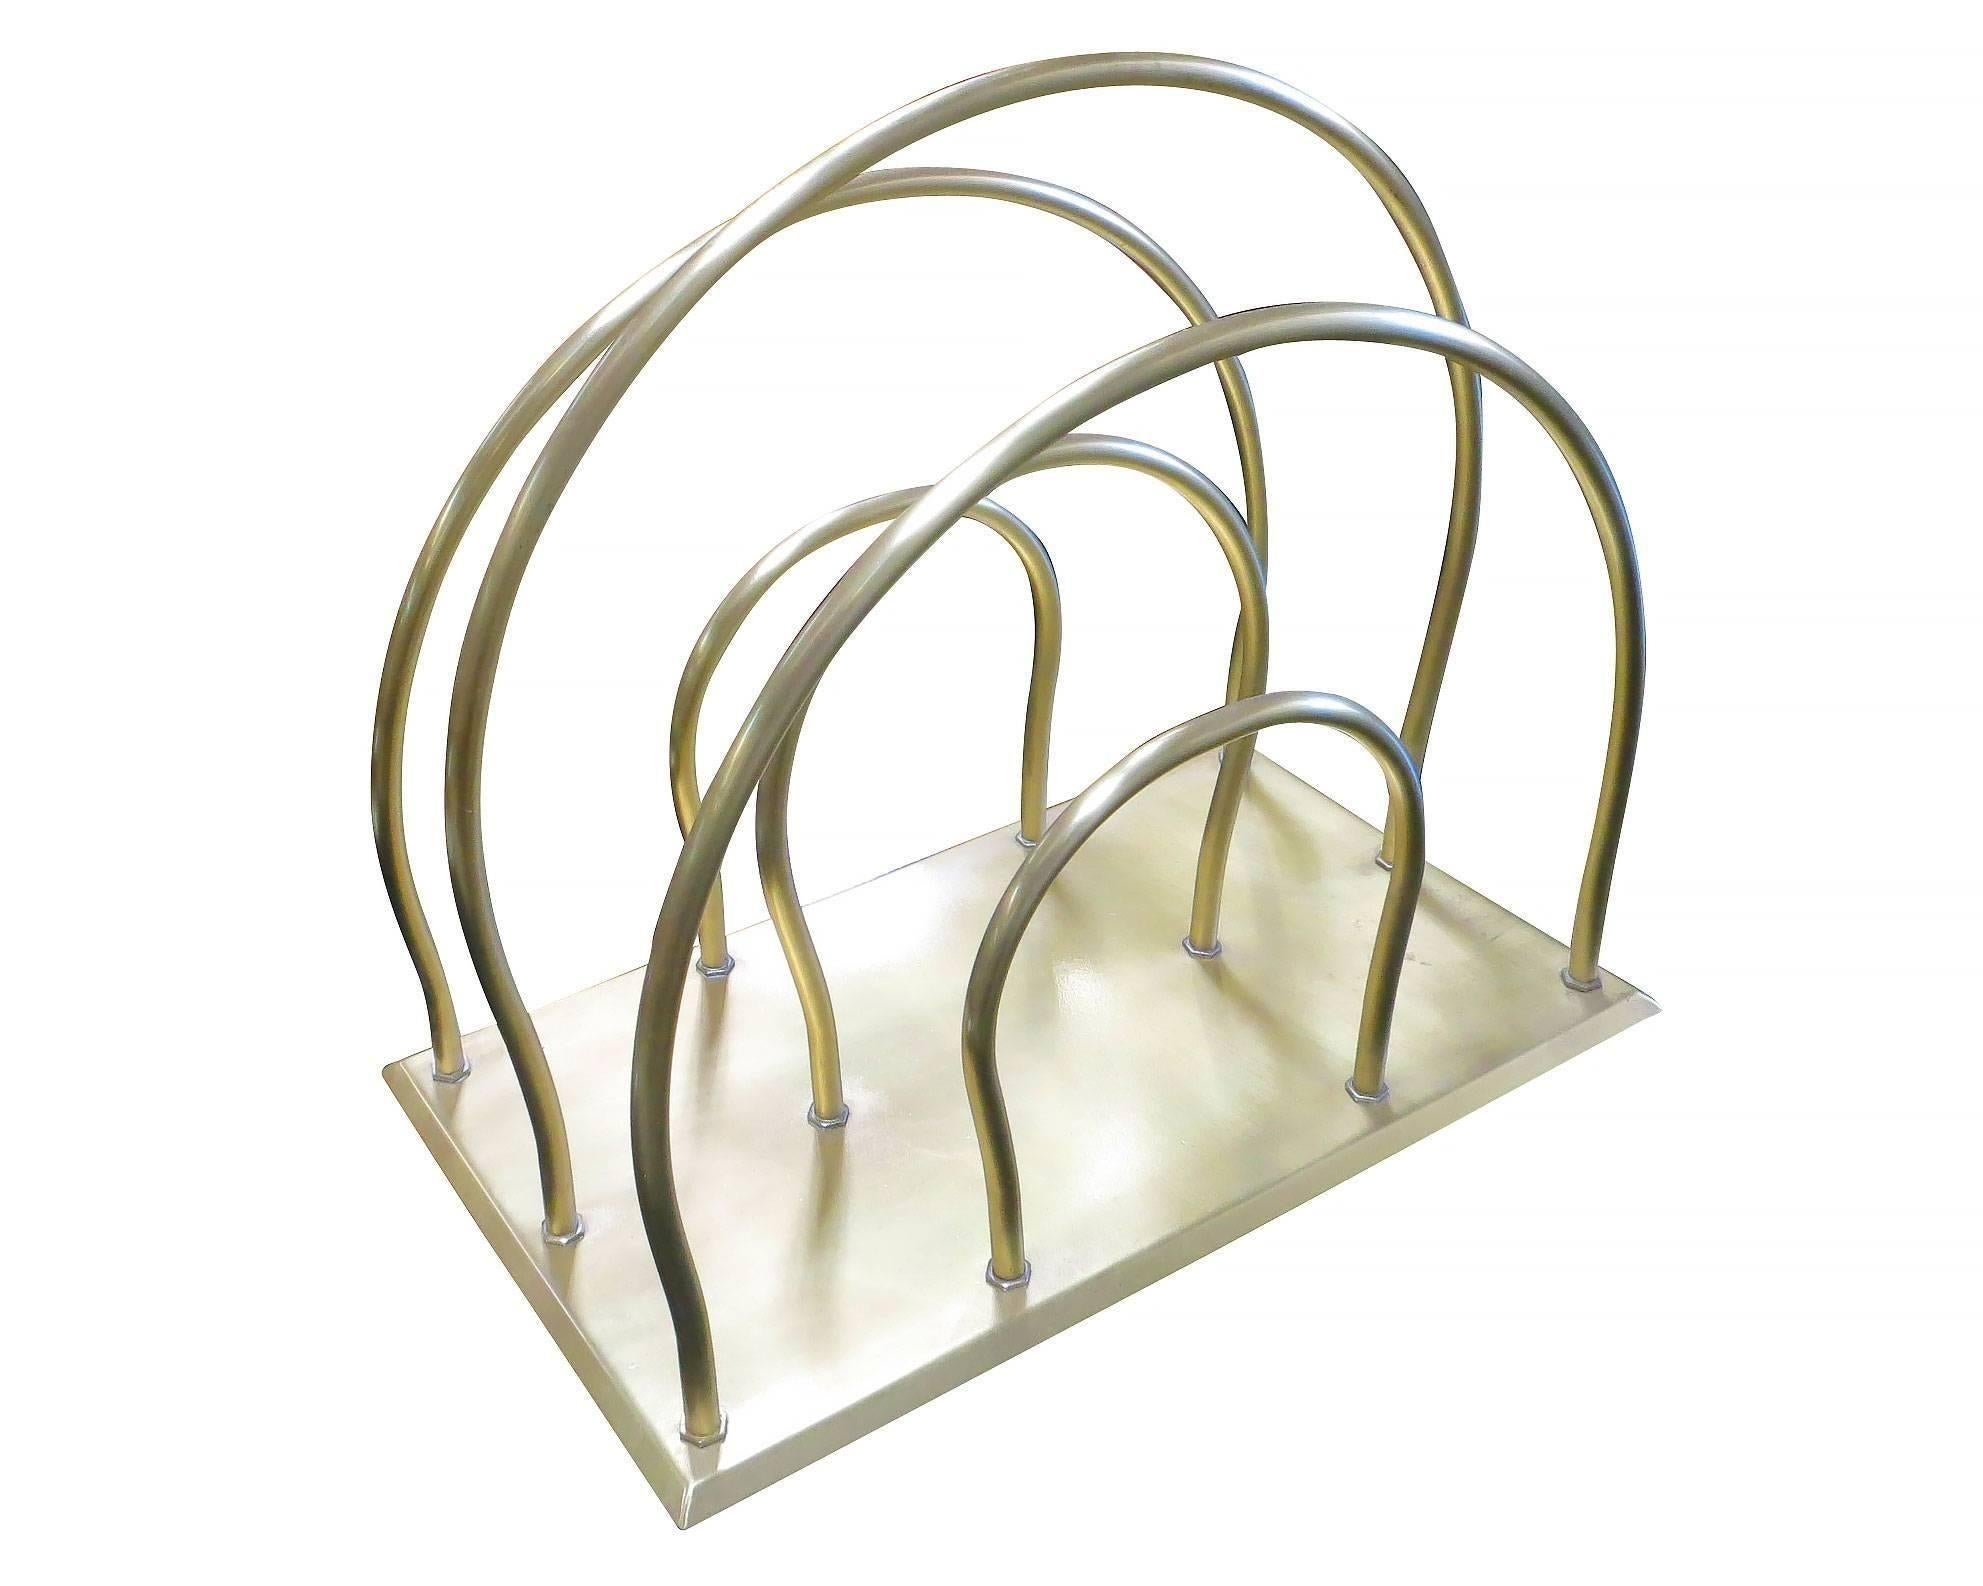 Art Deco Moderne Magazine Solid Brass Rack In Excellent Condition For Sale In Van Nuys, CA